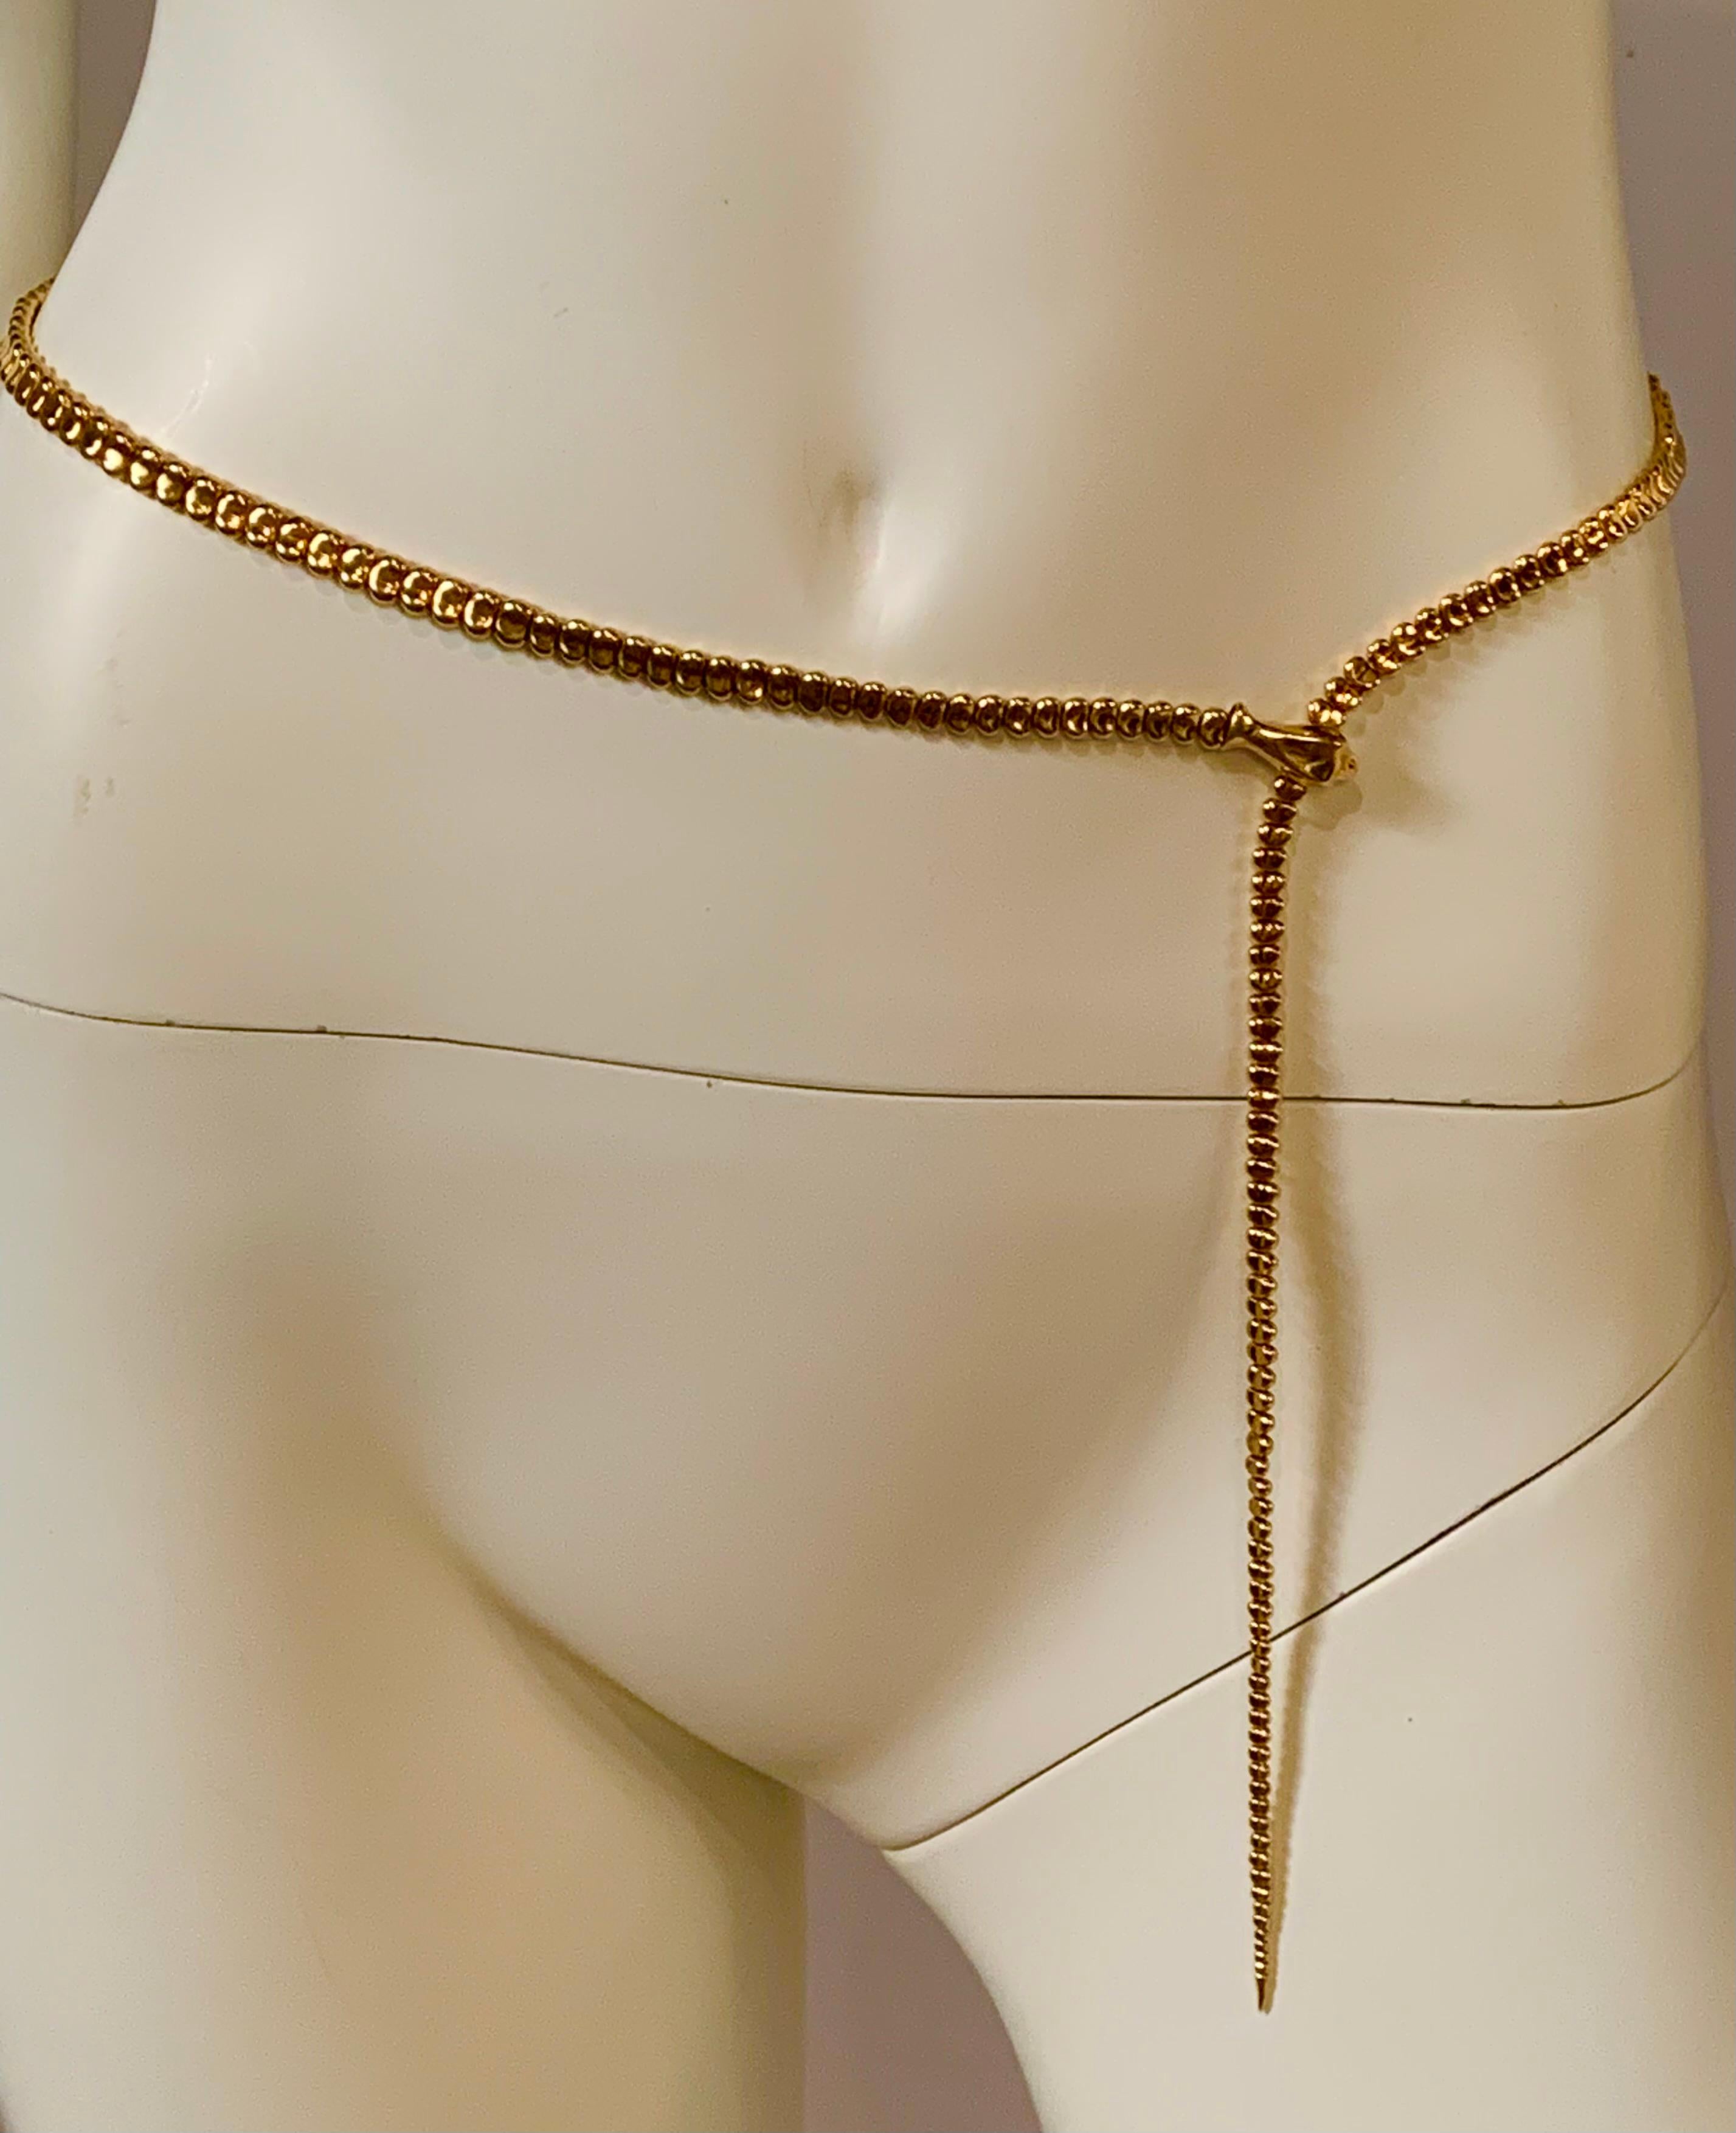 A very rare and striking 18 karat gold snake makes the perfect belt or necklace. The belt was designed by Elsa Peretti in the early 1970's in sterling silver, and then in gold to accessorize the designs of Halston. It was retailed by Tiffany & Co.